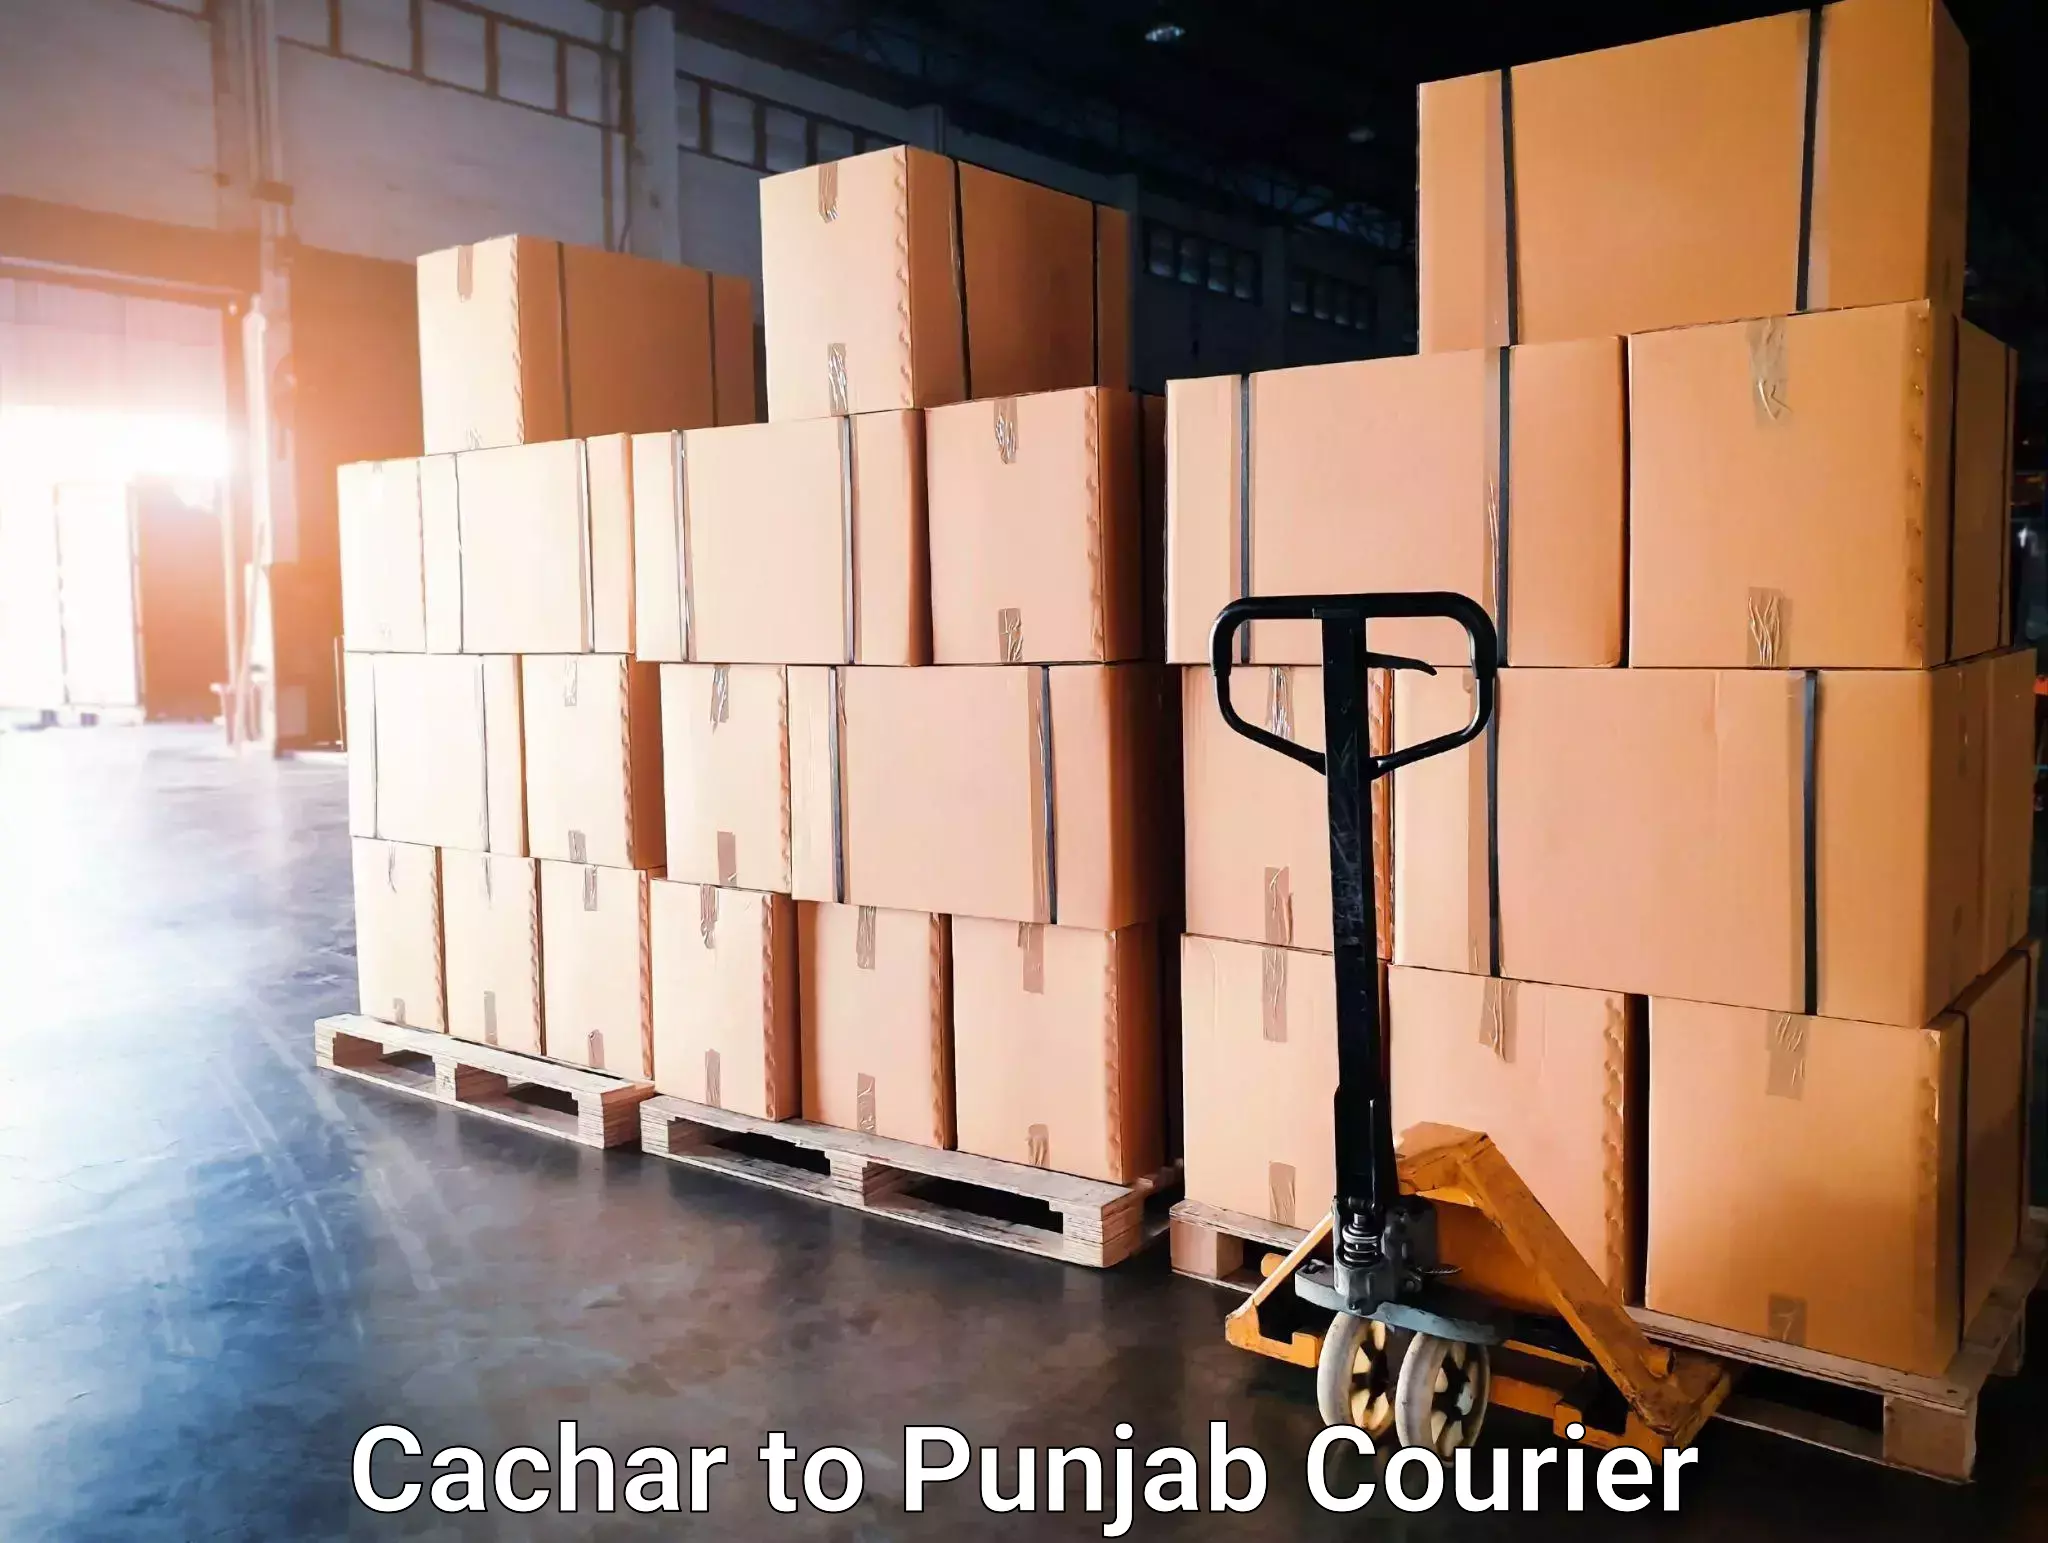 24-hour courier service Cachar to Sultanpur Lodhi